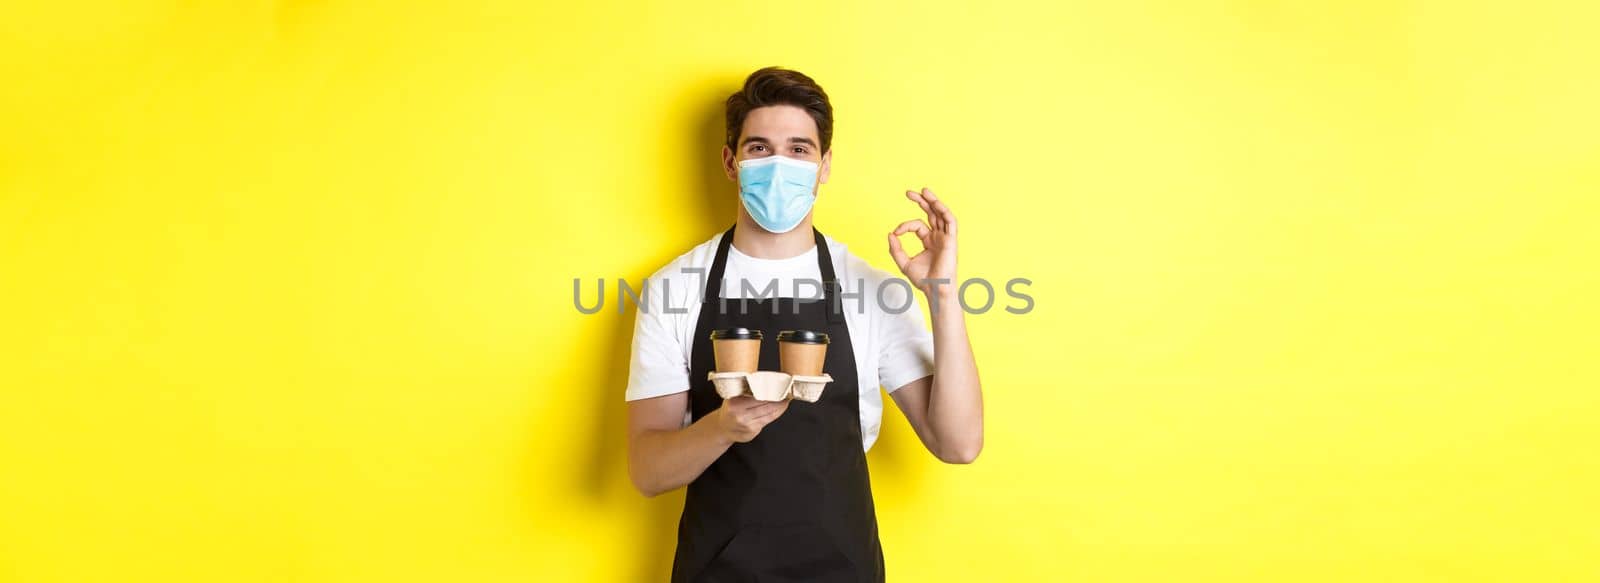 Concept of covid-19, cafe and social distancing. Barista in medical mask and black apron guarantee safety, holding takeaway cups of coffee and showing OK sign, yellow background.